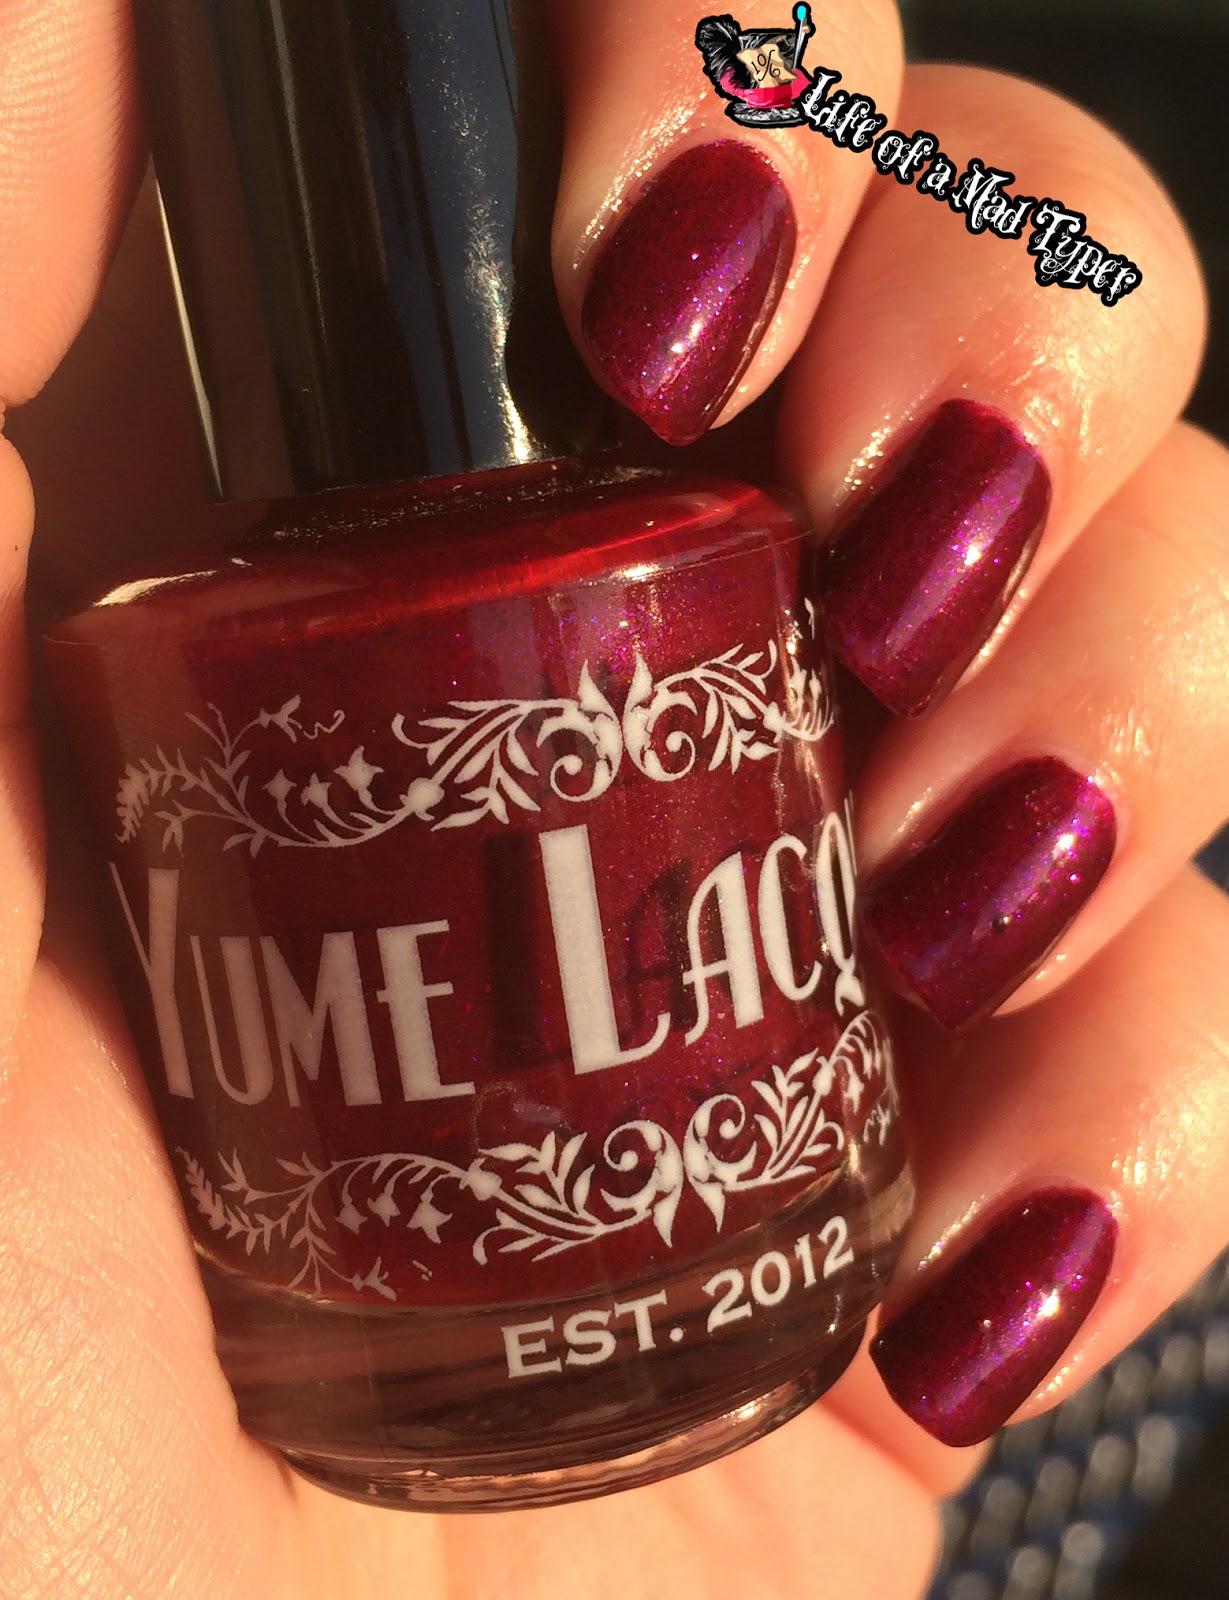 Yume Lacquer Moonlight Defender collection flame warrior